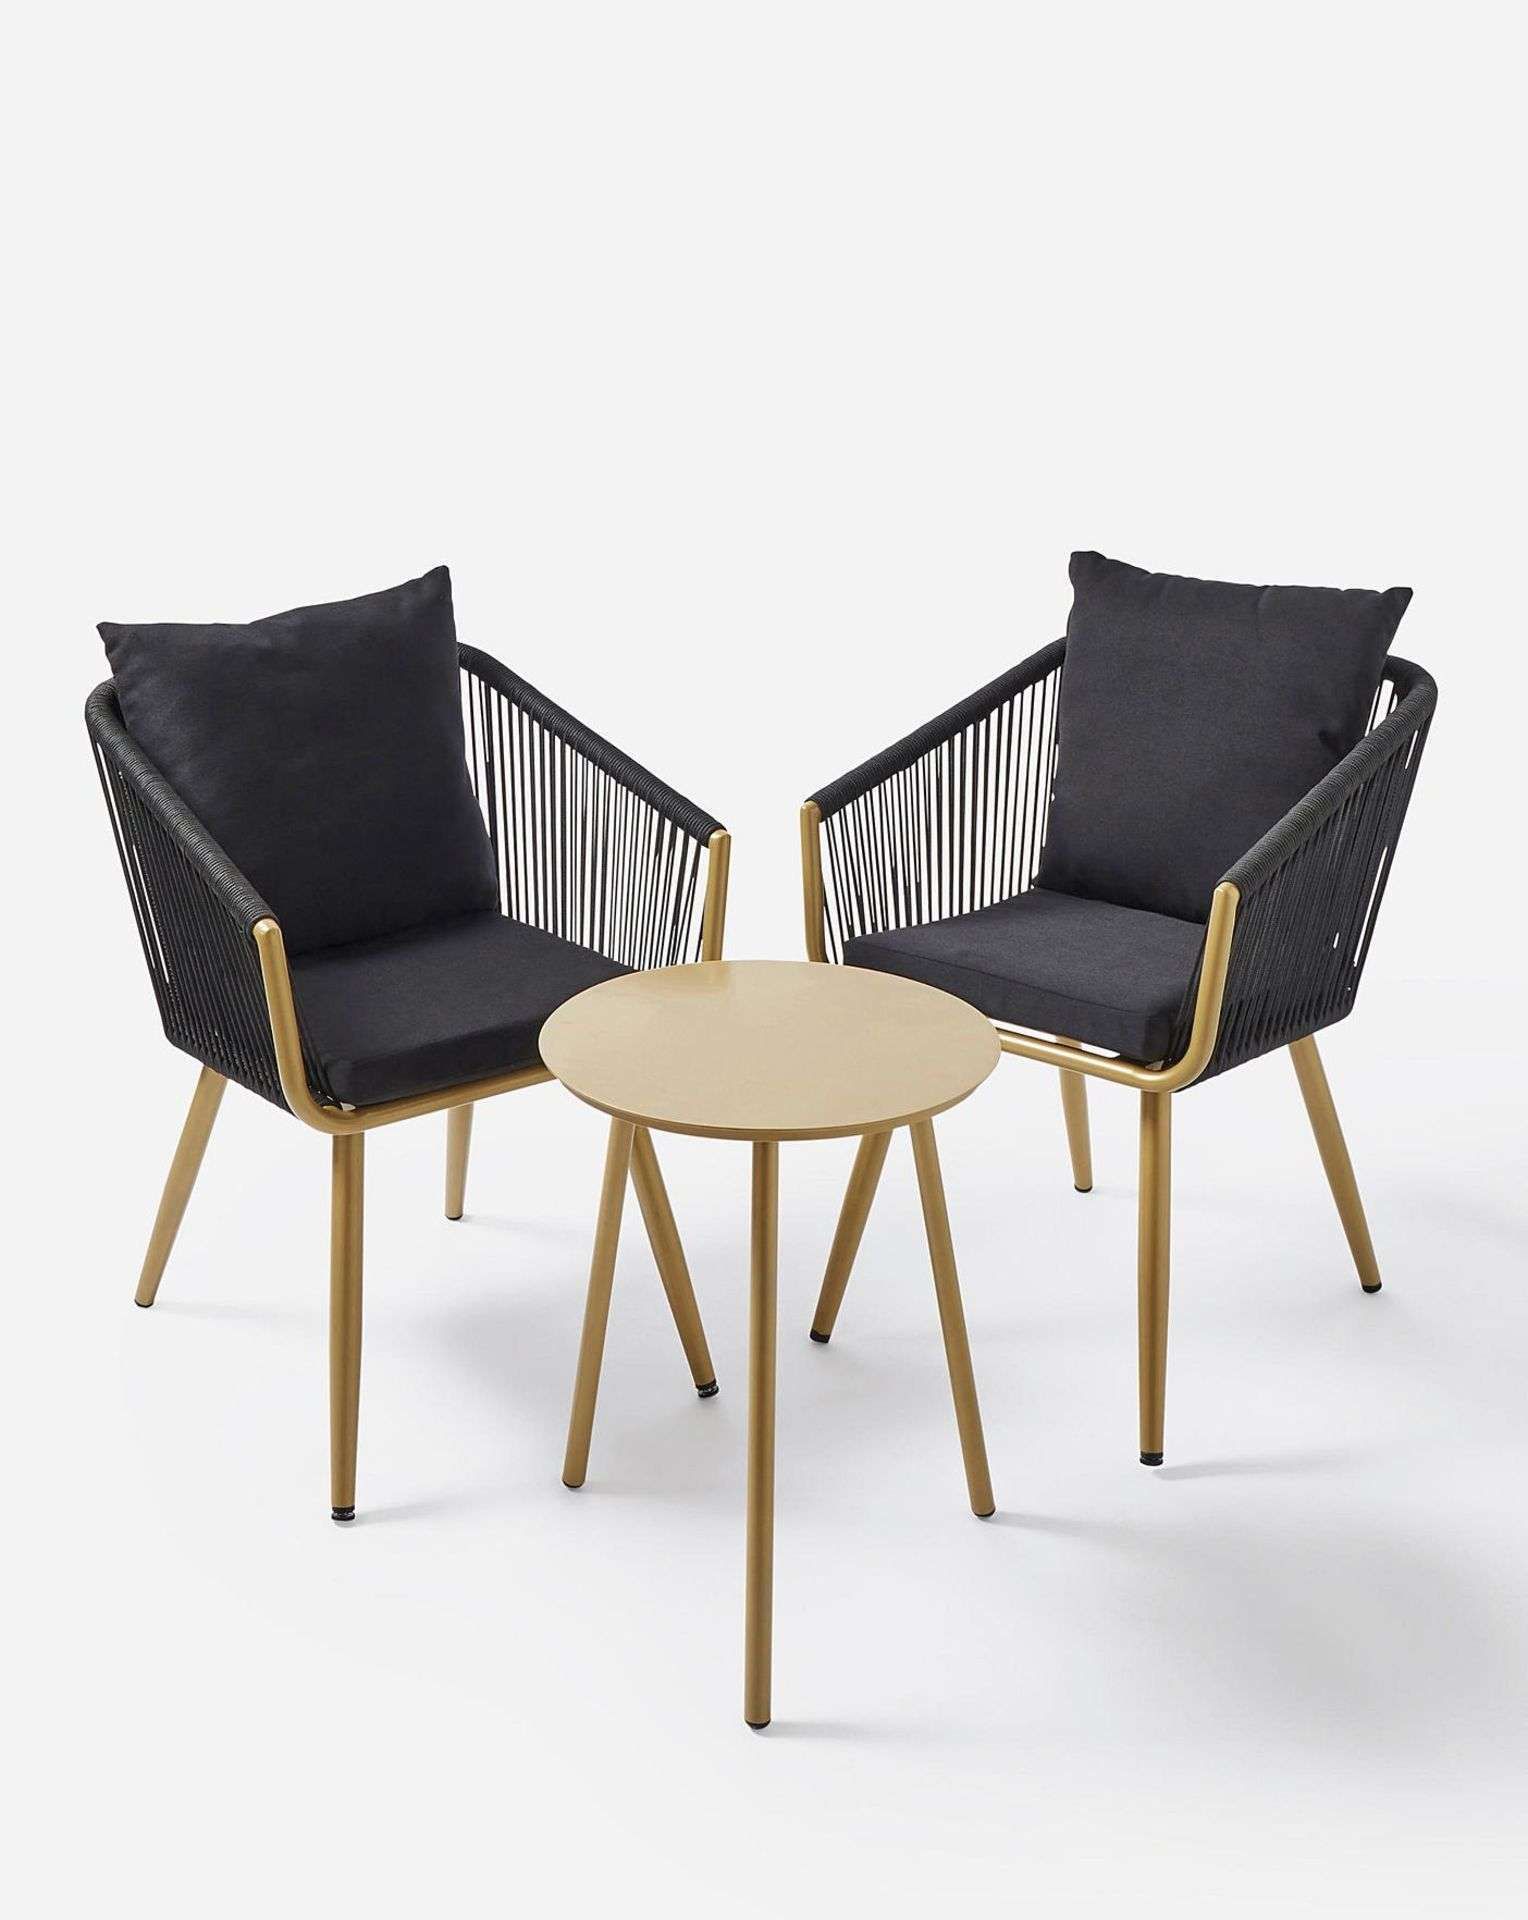 Trade Lot 5 X New & Boxed Joanna Hope Naya Bistro Set. RRP £379 each. (E/R) This Exclusive Joanna - Image 2 of 3